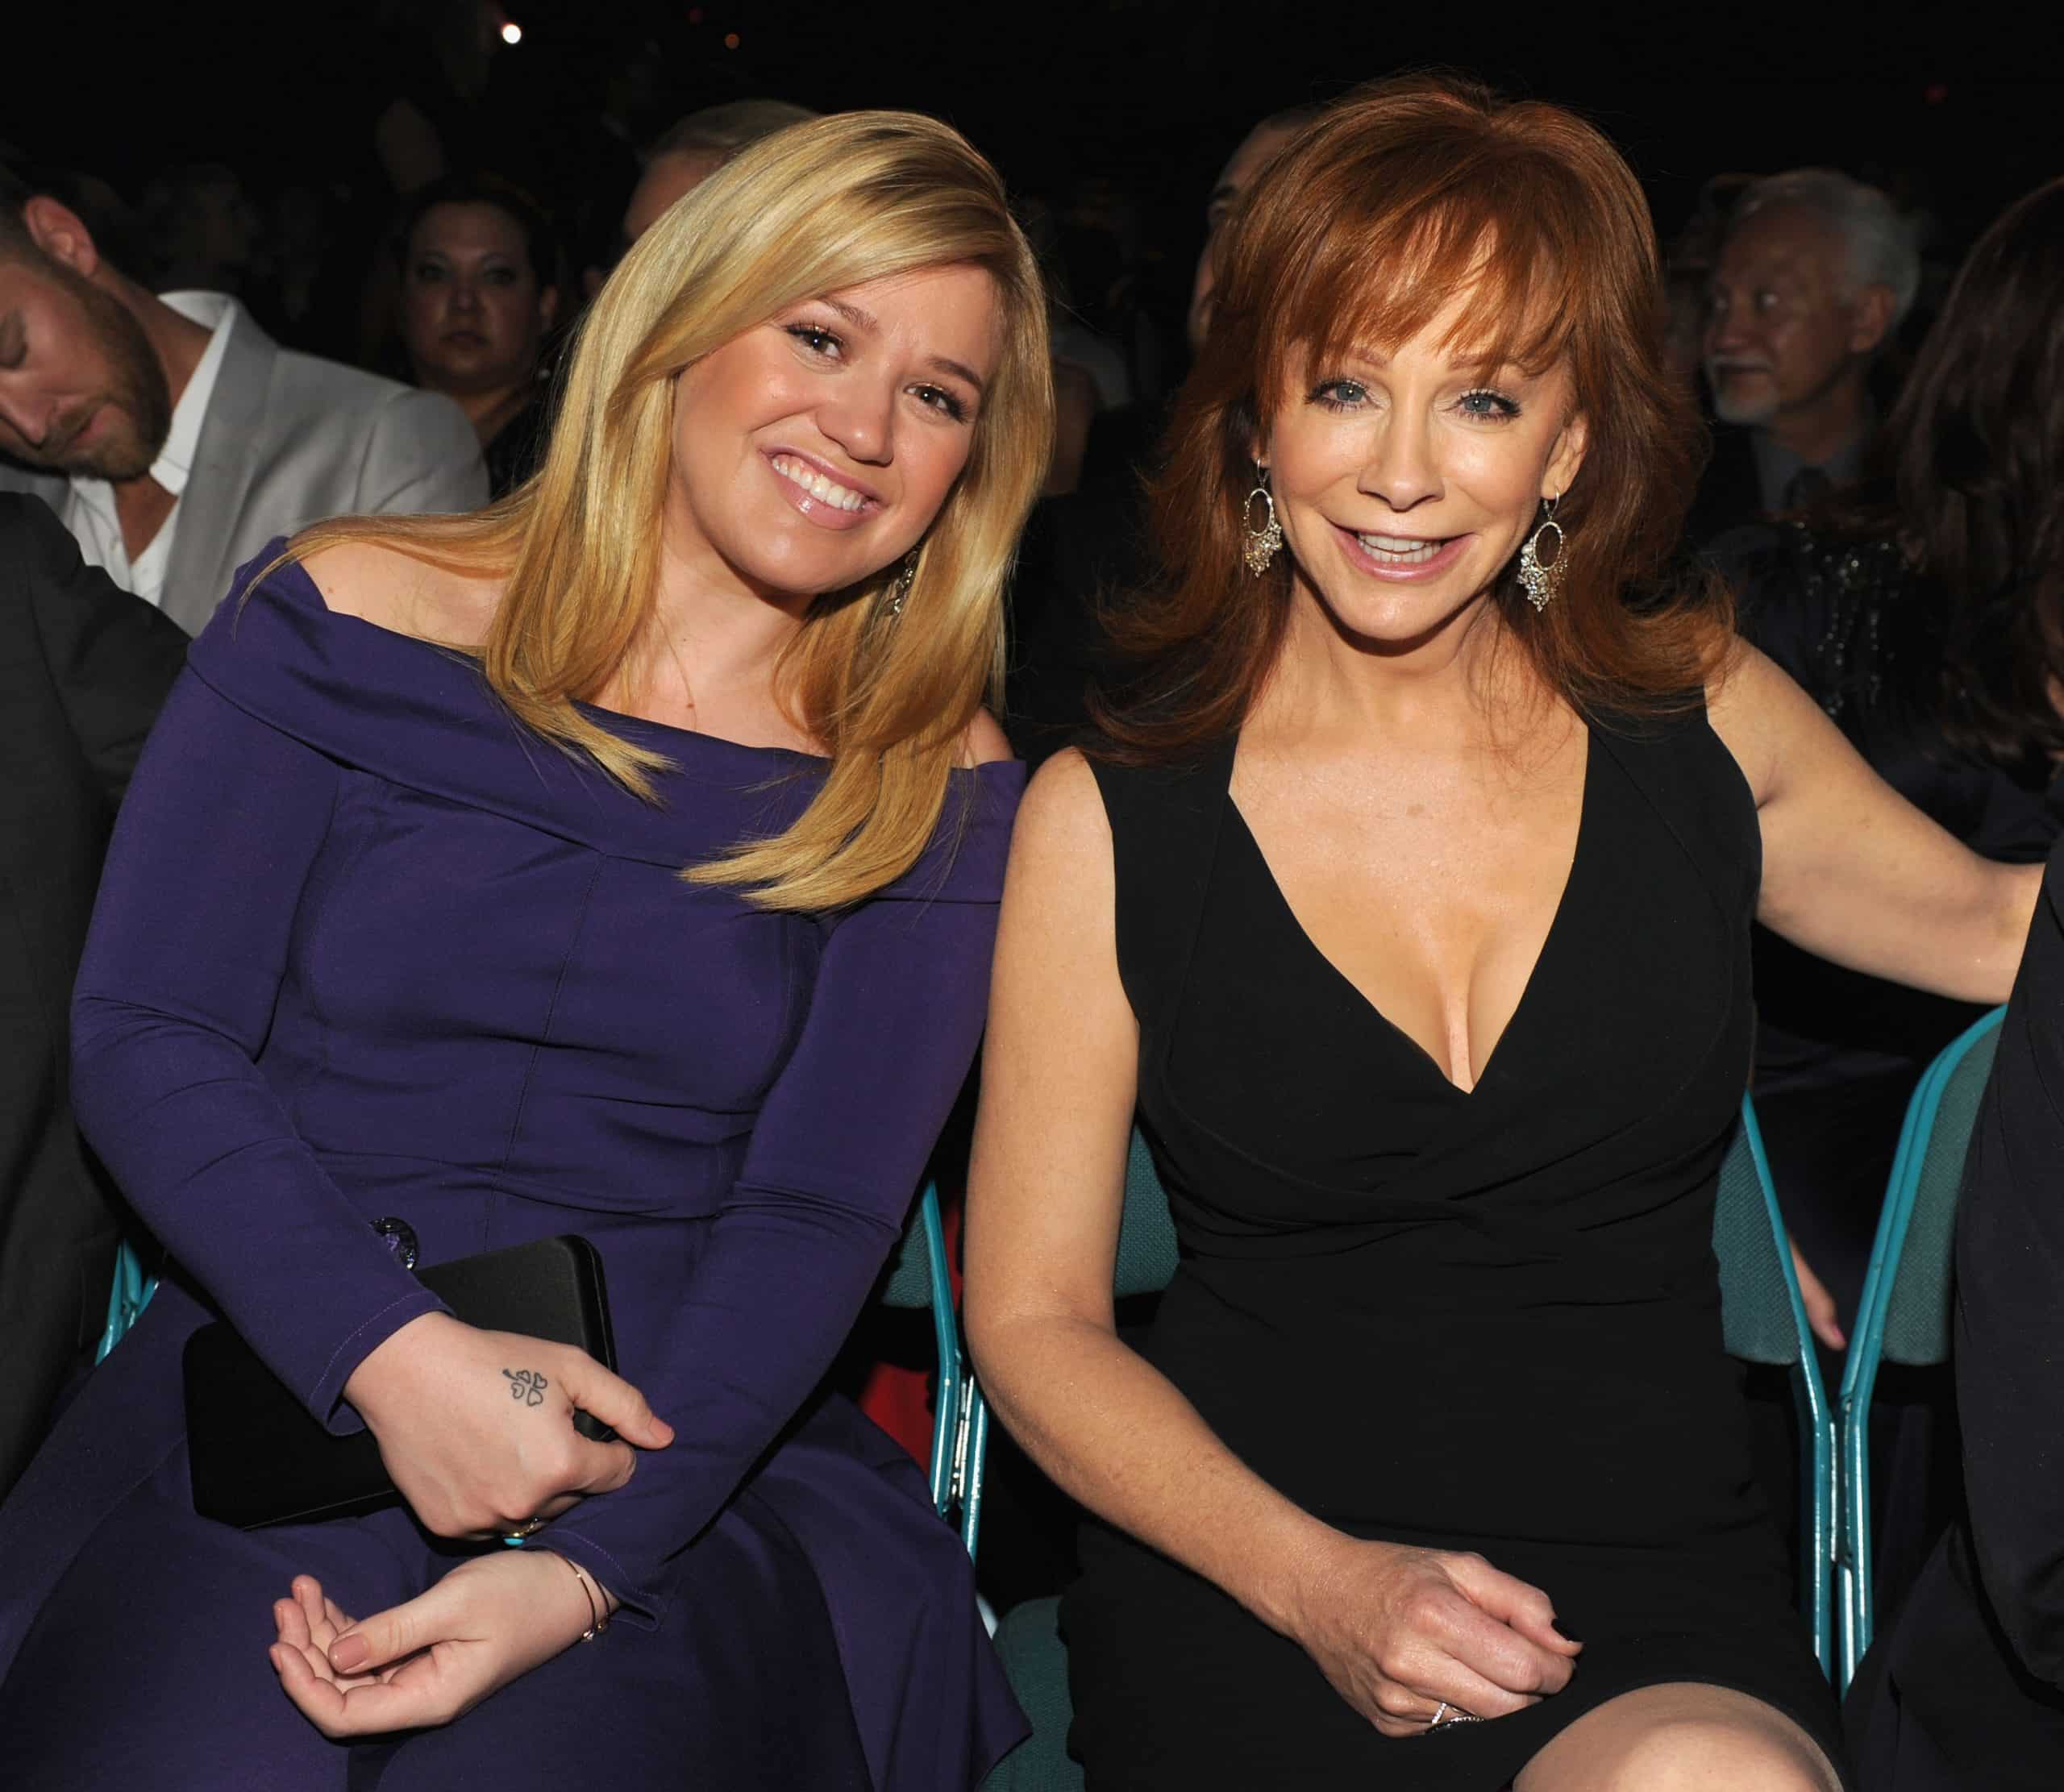 LAS VEGAS, NV - APRIL 07: Singers Kelly Clarkson (L) and Reba McEntire pose in the audience during the 48th Annual Academy of Country Music Awards at the MGM Grand Garden Arena on April 7, 2013 in Las Vegas, Nevada. (Photo by Kevin Winter/ACMA2013/Getty Images for ACM)